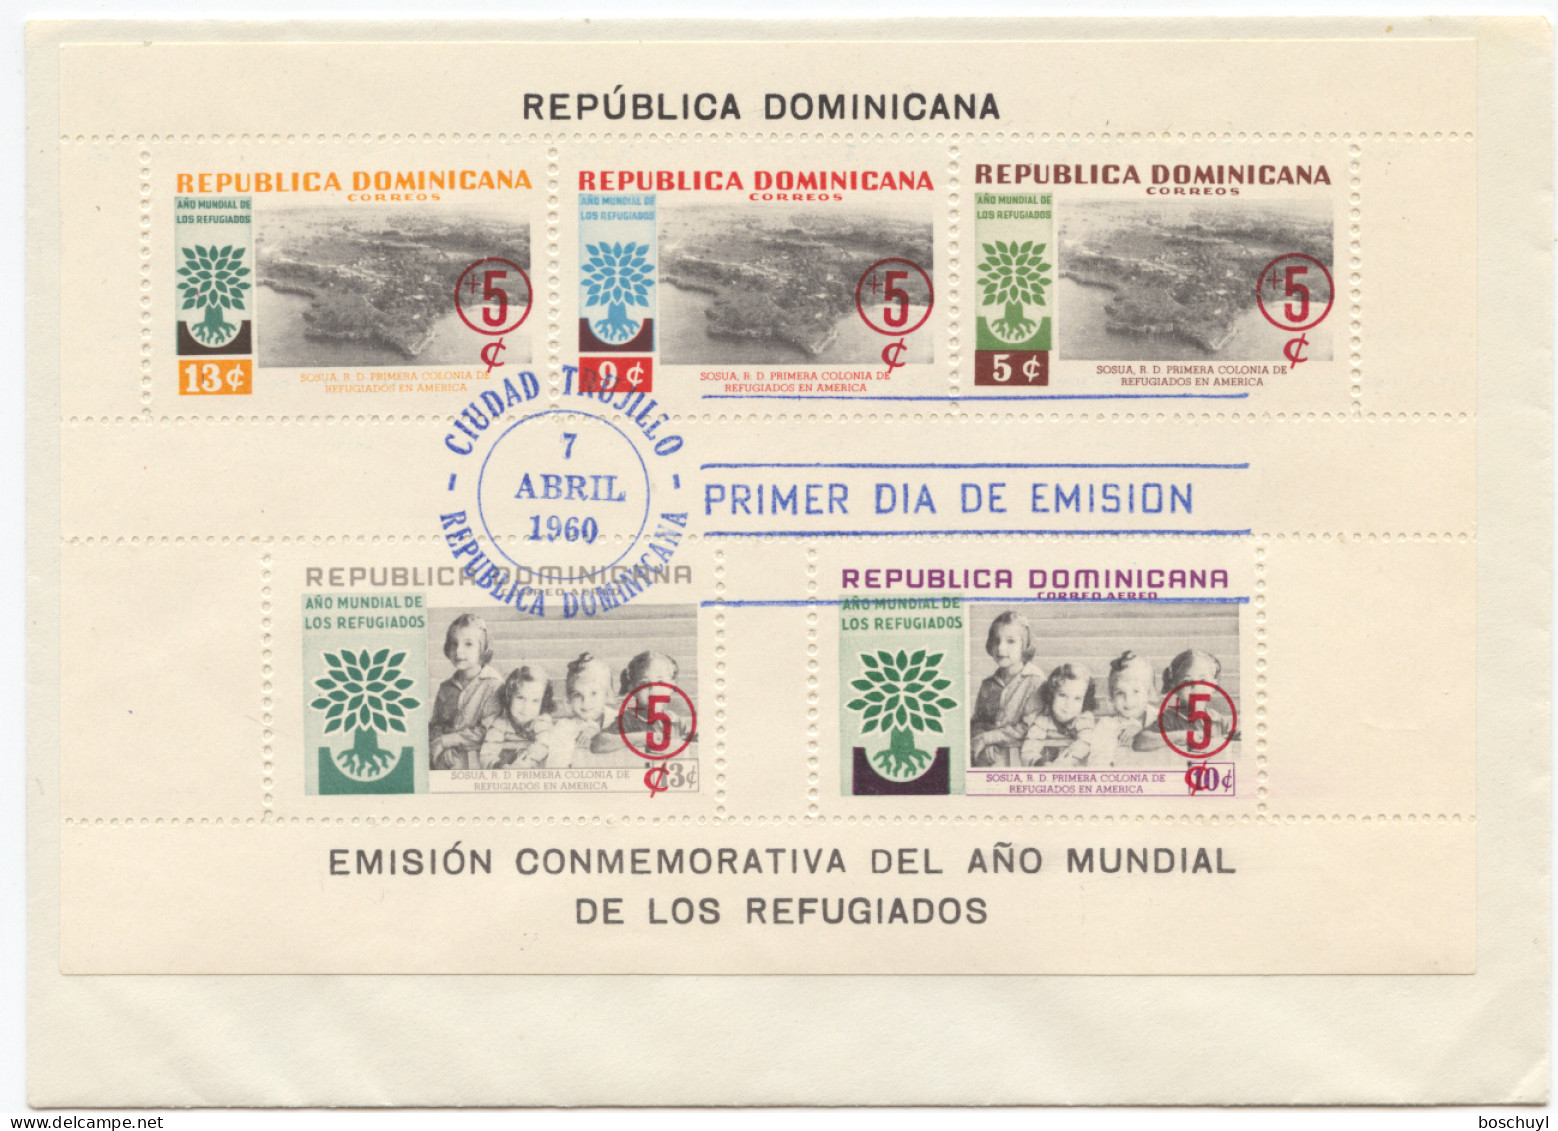 Dominican Republic, 1960, World Refugee Year, WRY, United Nations, Overprinted, On Cover, FD Cancelled, Michel Block 24A - Flüchtlinge